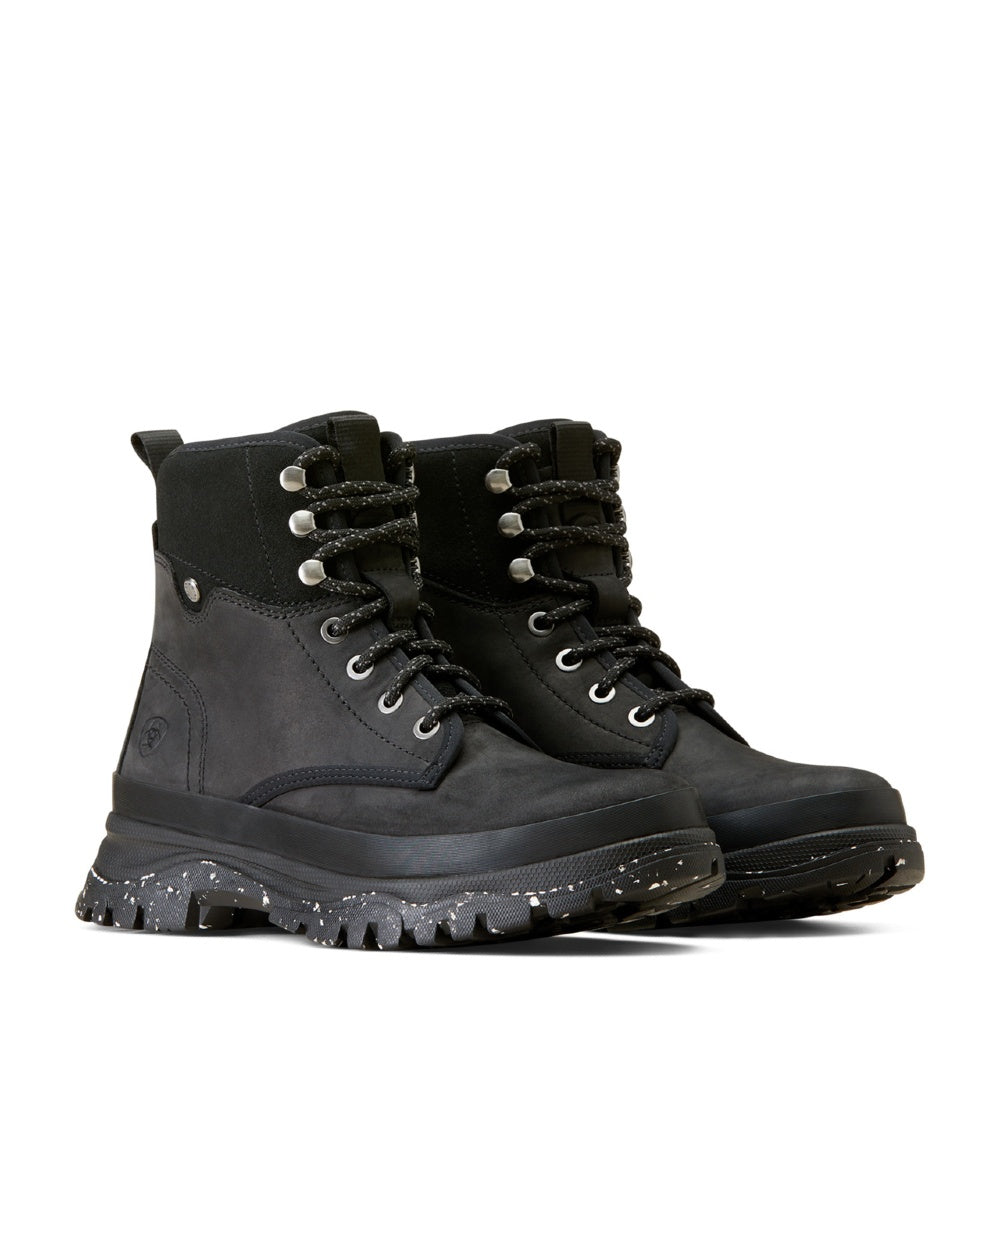 Ariat Womens Moresby Waterproof Boots in Distressed Black 